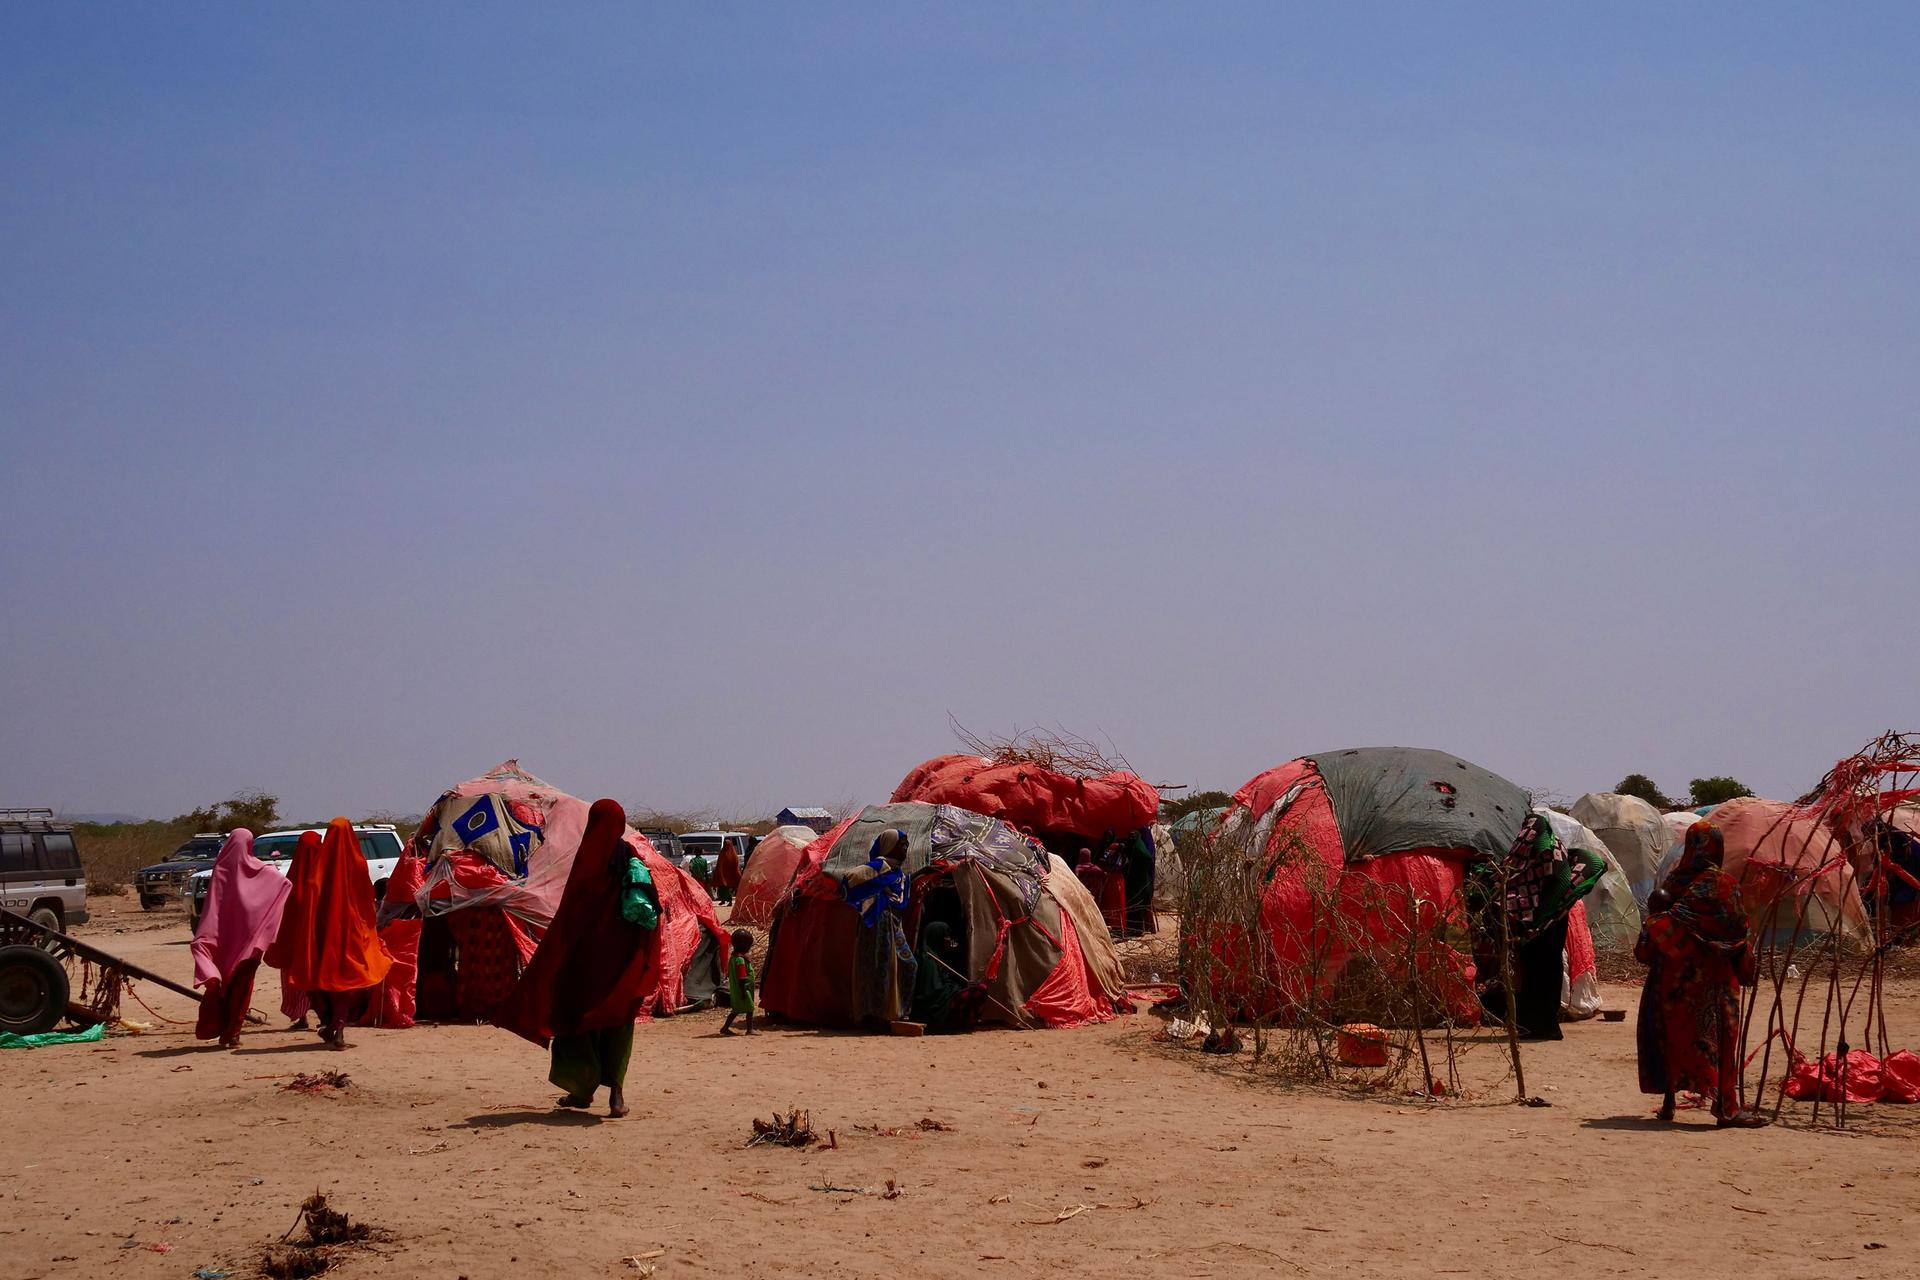 More than 600,000 people have become displaced due to the ongoing drought in Somalia. Many end up at camps like this one in Luuq, Somalia, March 21, 2022.